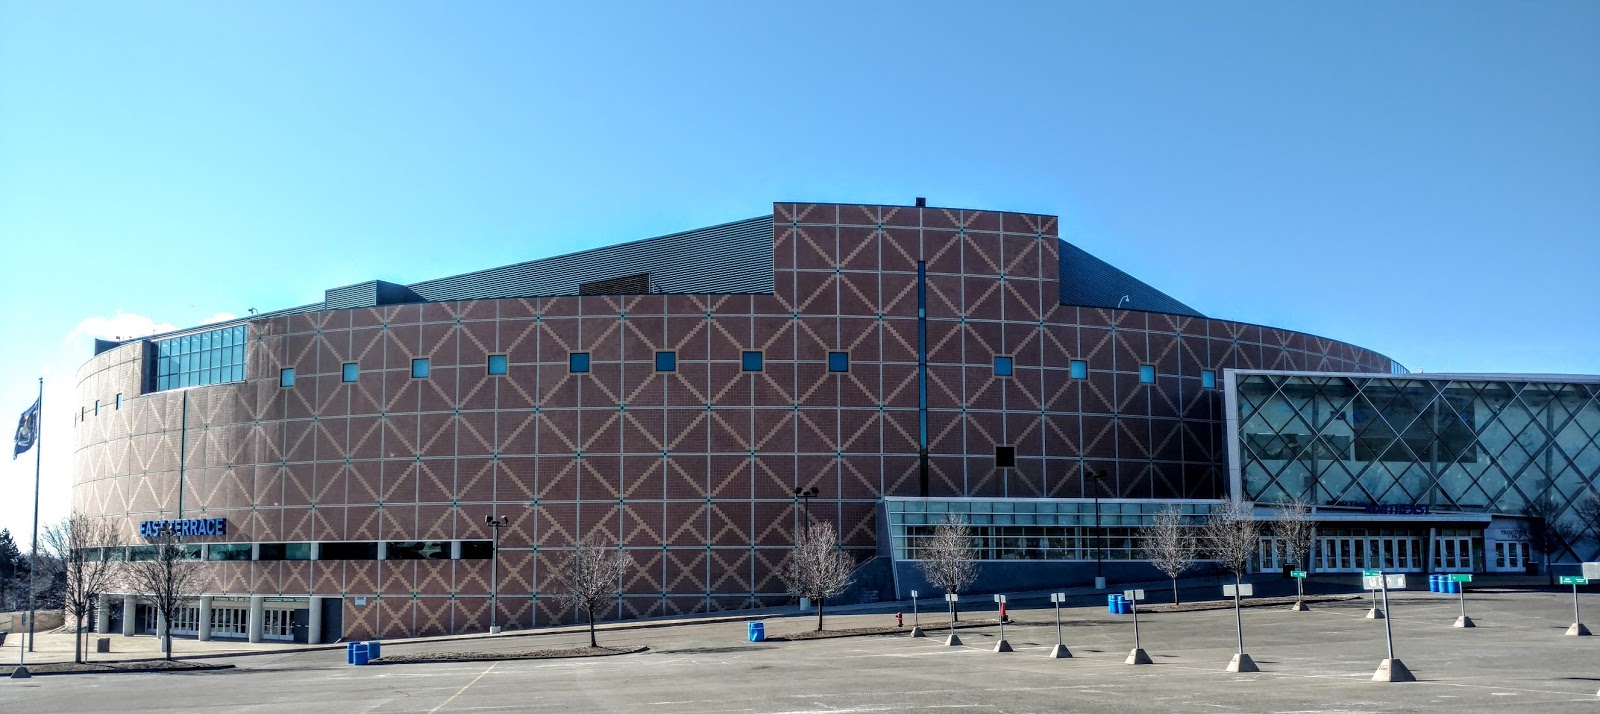 The Palace of Auburn Hills - One of the Most Famous NBA Arenas In History -  Architectural Afterlife